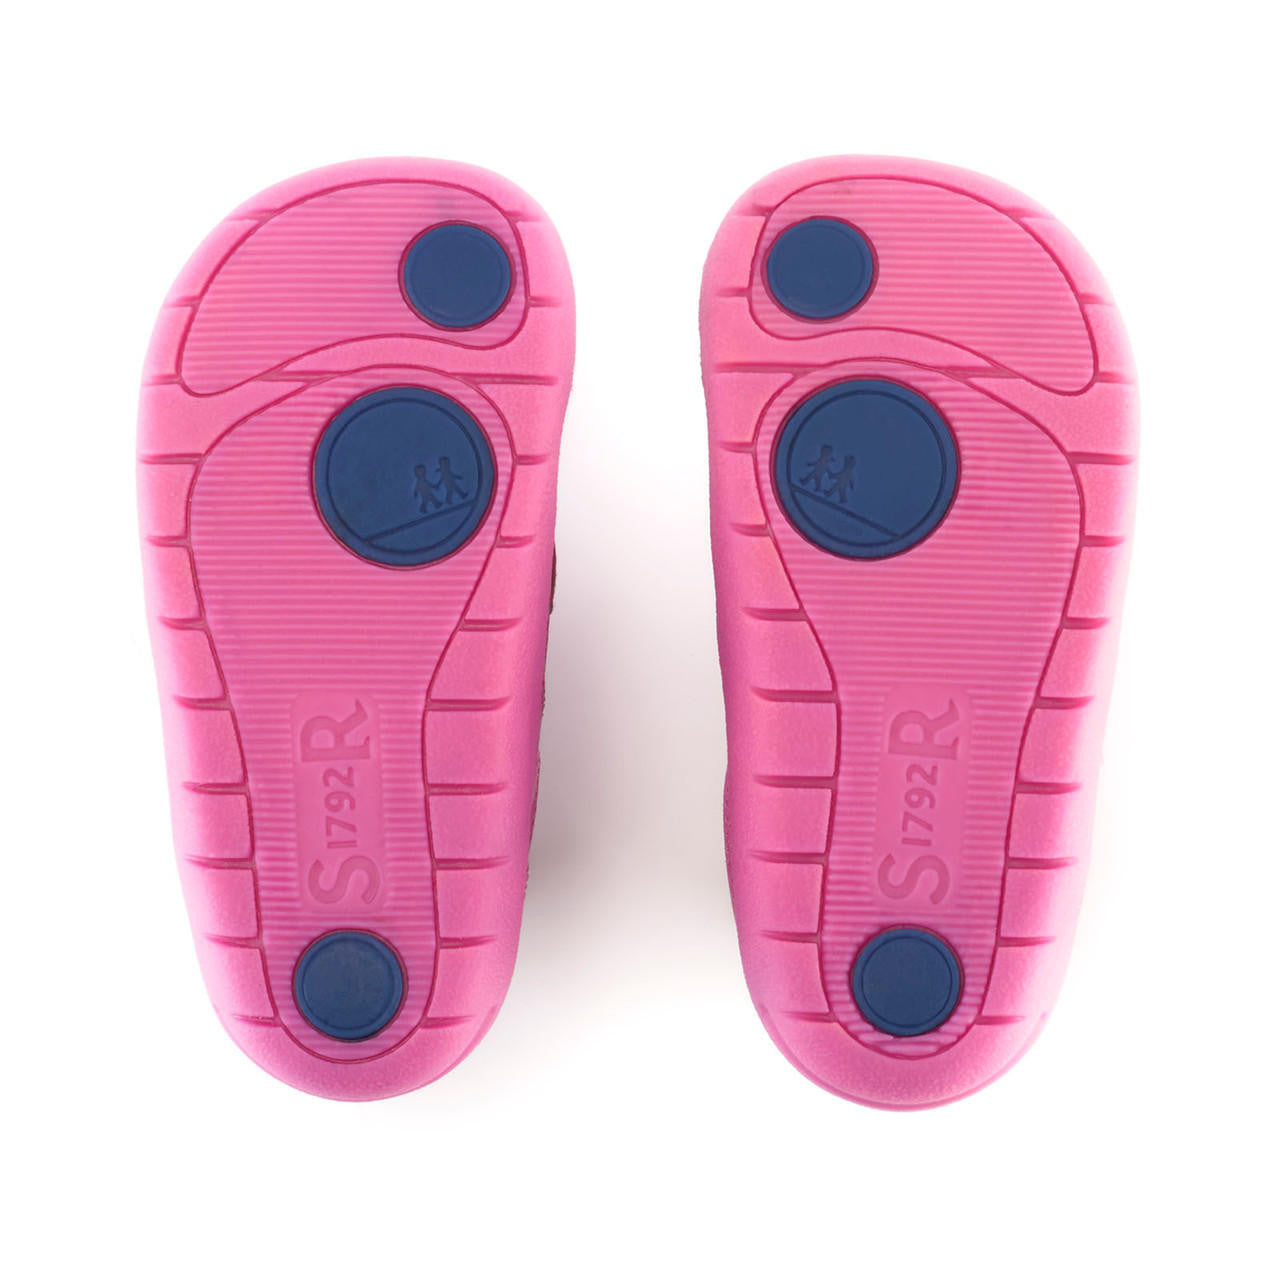 A girls boot by Start Rite and JoJo Maman Bebé collaboration, style Play Date  in Pink Leather and Floral Nubuck, with double velcro fastening and padded ankle. Bottom view of pair showing pink sole.